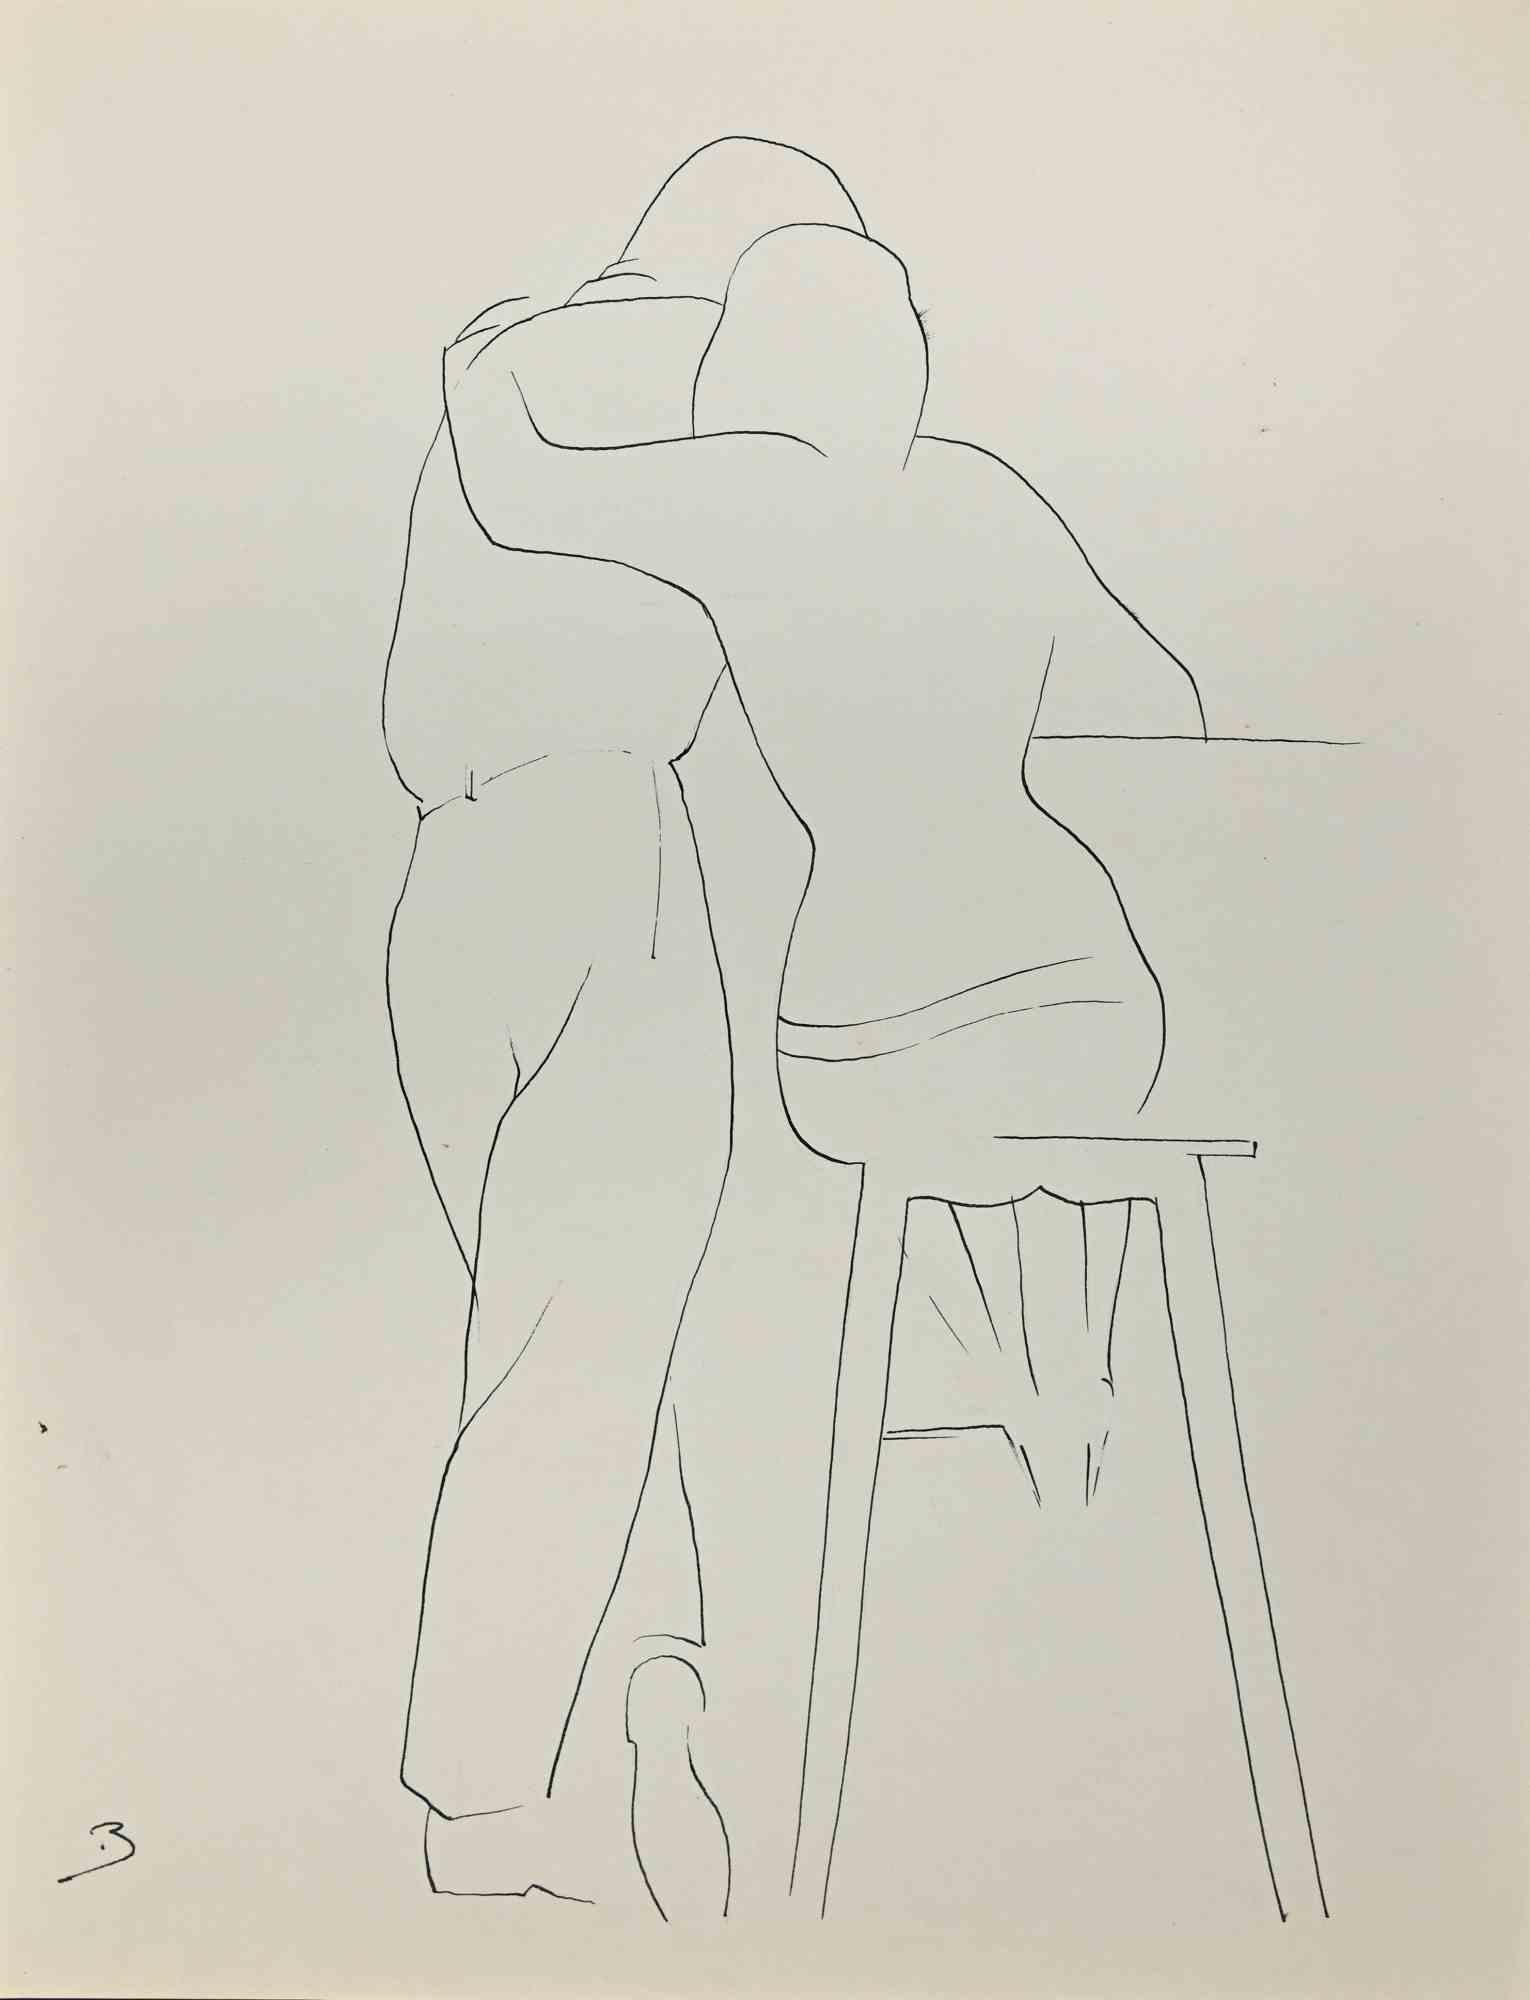 The couple is an artwork realized by Buscot, 1950s. 

Monochrome pen on paper.

30 x 25 cm.

Good condition.